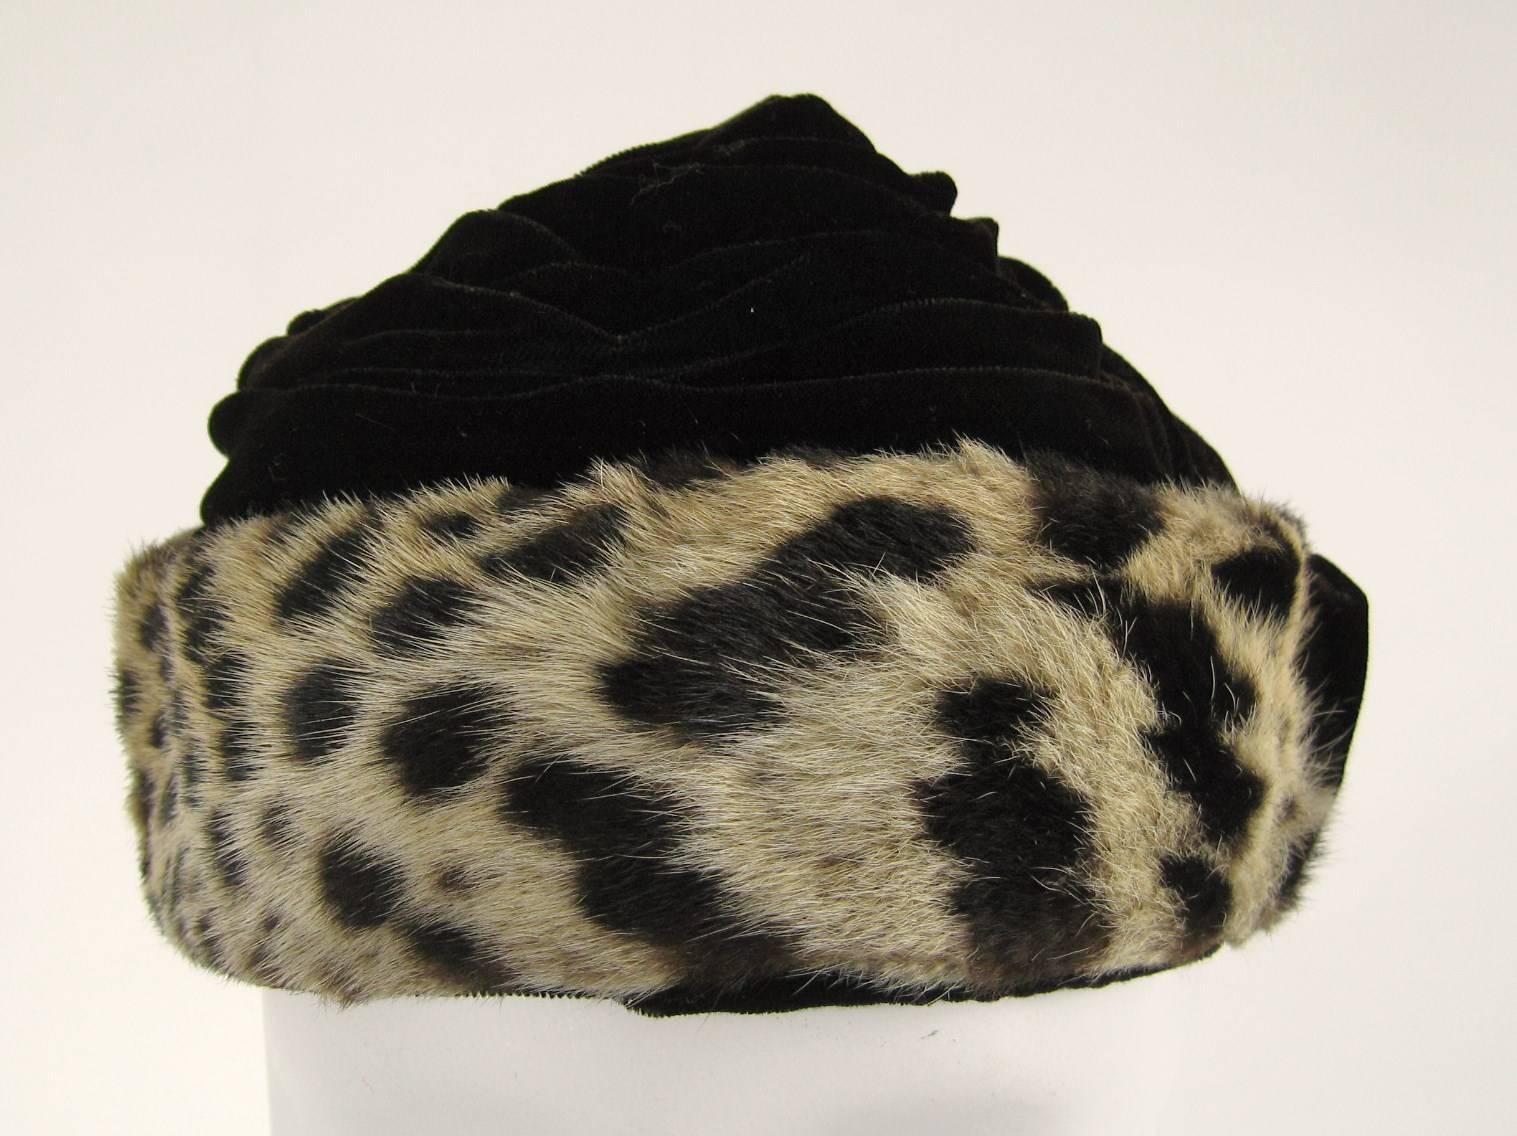 Stunning Leopard print and Velvet 1960s hat. Ruched velvet on top with a Brown Bow at the back Measuring 21 in inside - XS Leopard measures 2.3/8 in wide. Please refer to photos for condition. This is great condition considering it's 50+ years old.